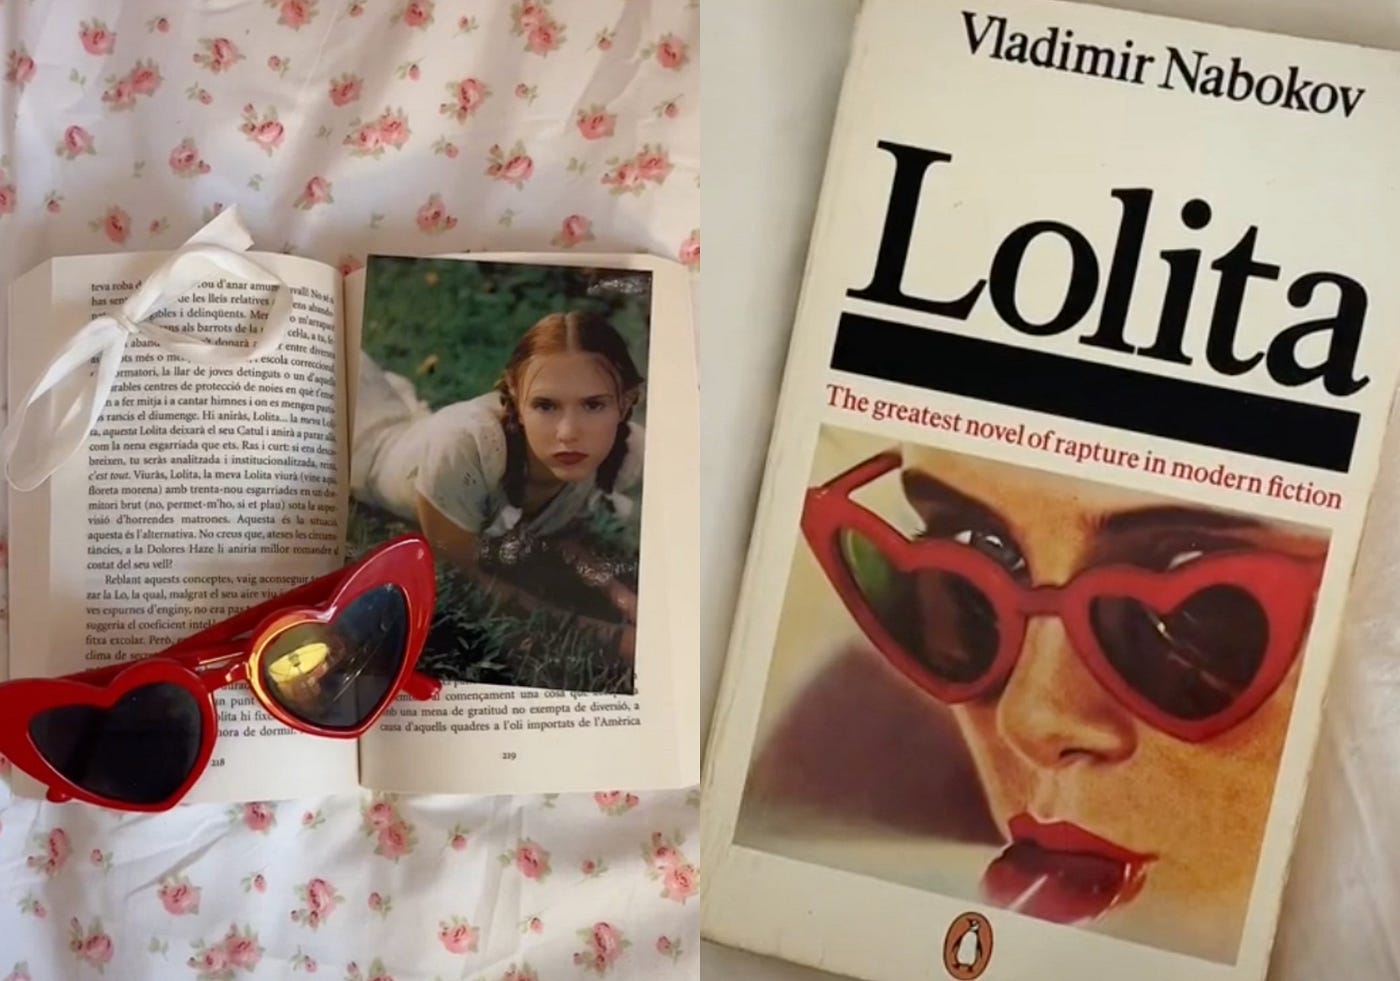 Lolita Was An 11-Year-Old Victim. Nabokov's Inspiration is Sally Horner… |  by Rivka Wolf | History of Women | Medium